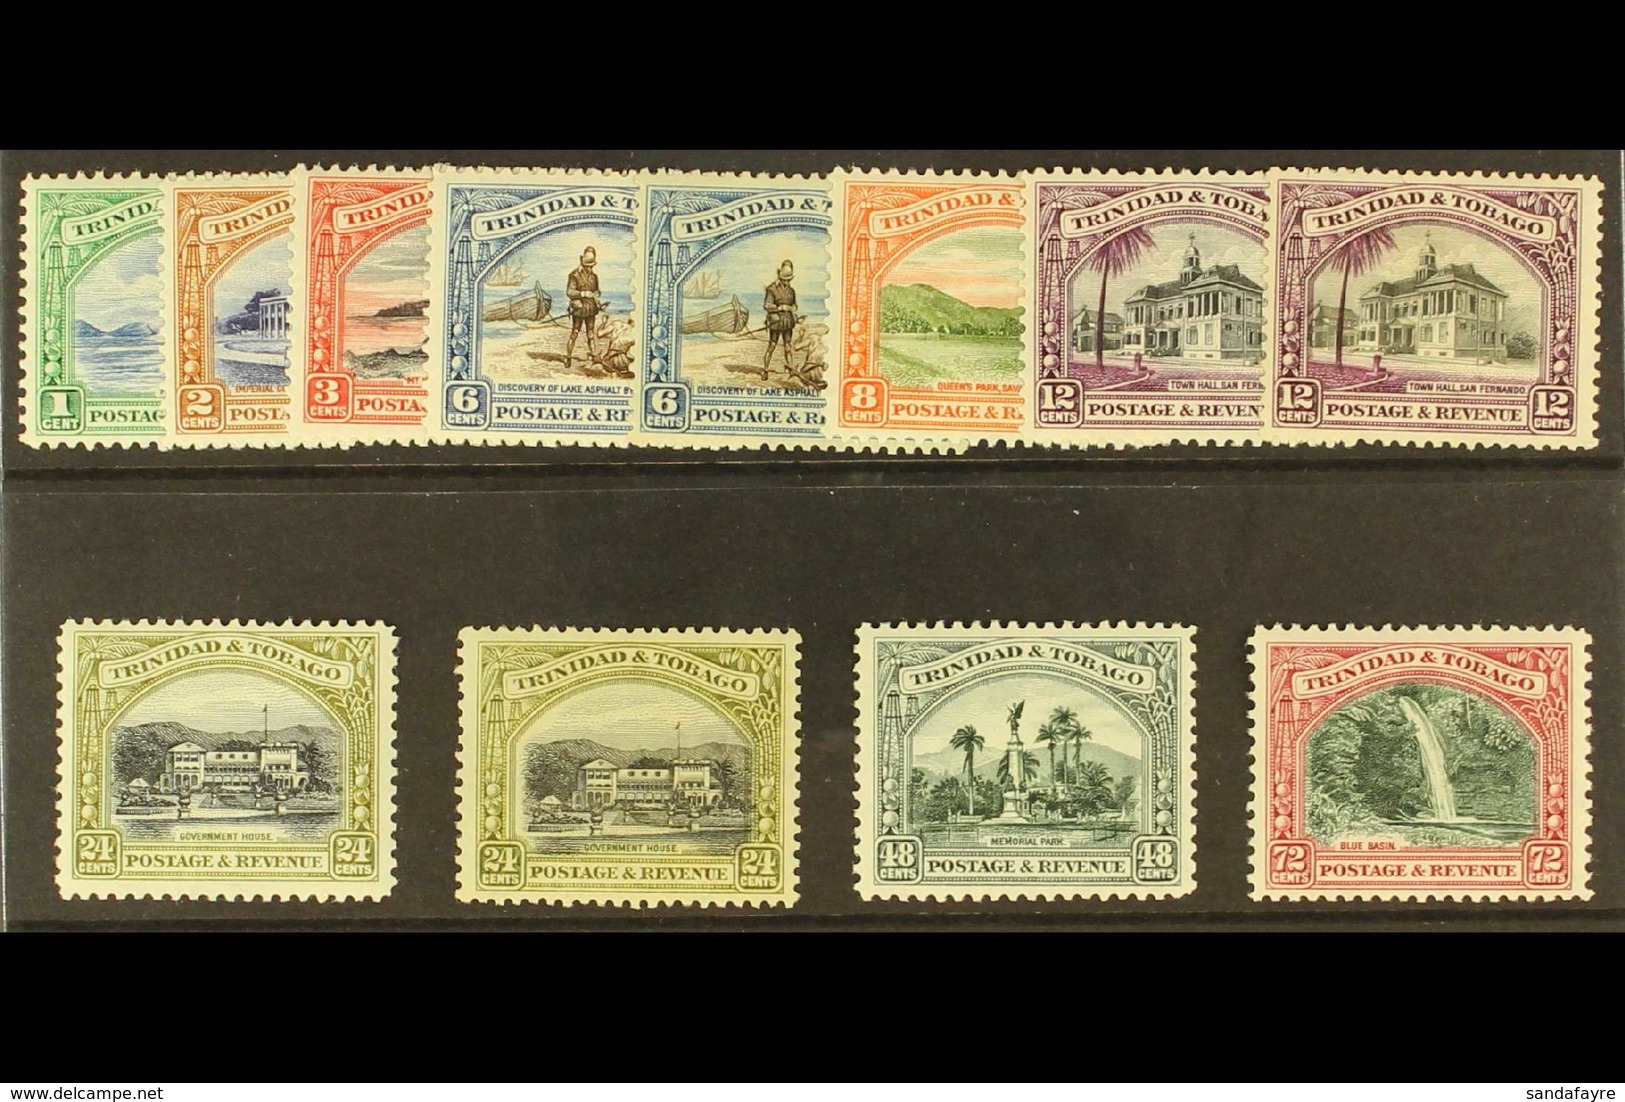 1935-37 Pictorial Definitive Set, SG 230/38, Plus 6c, 12c And 24c Additional Listed Perfs, Fine Fresh Mint. (12 Stamps)  - Trinidad & Tobago (...-1961)